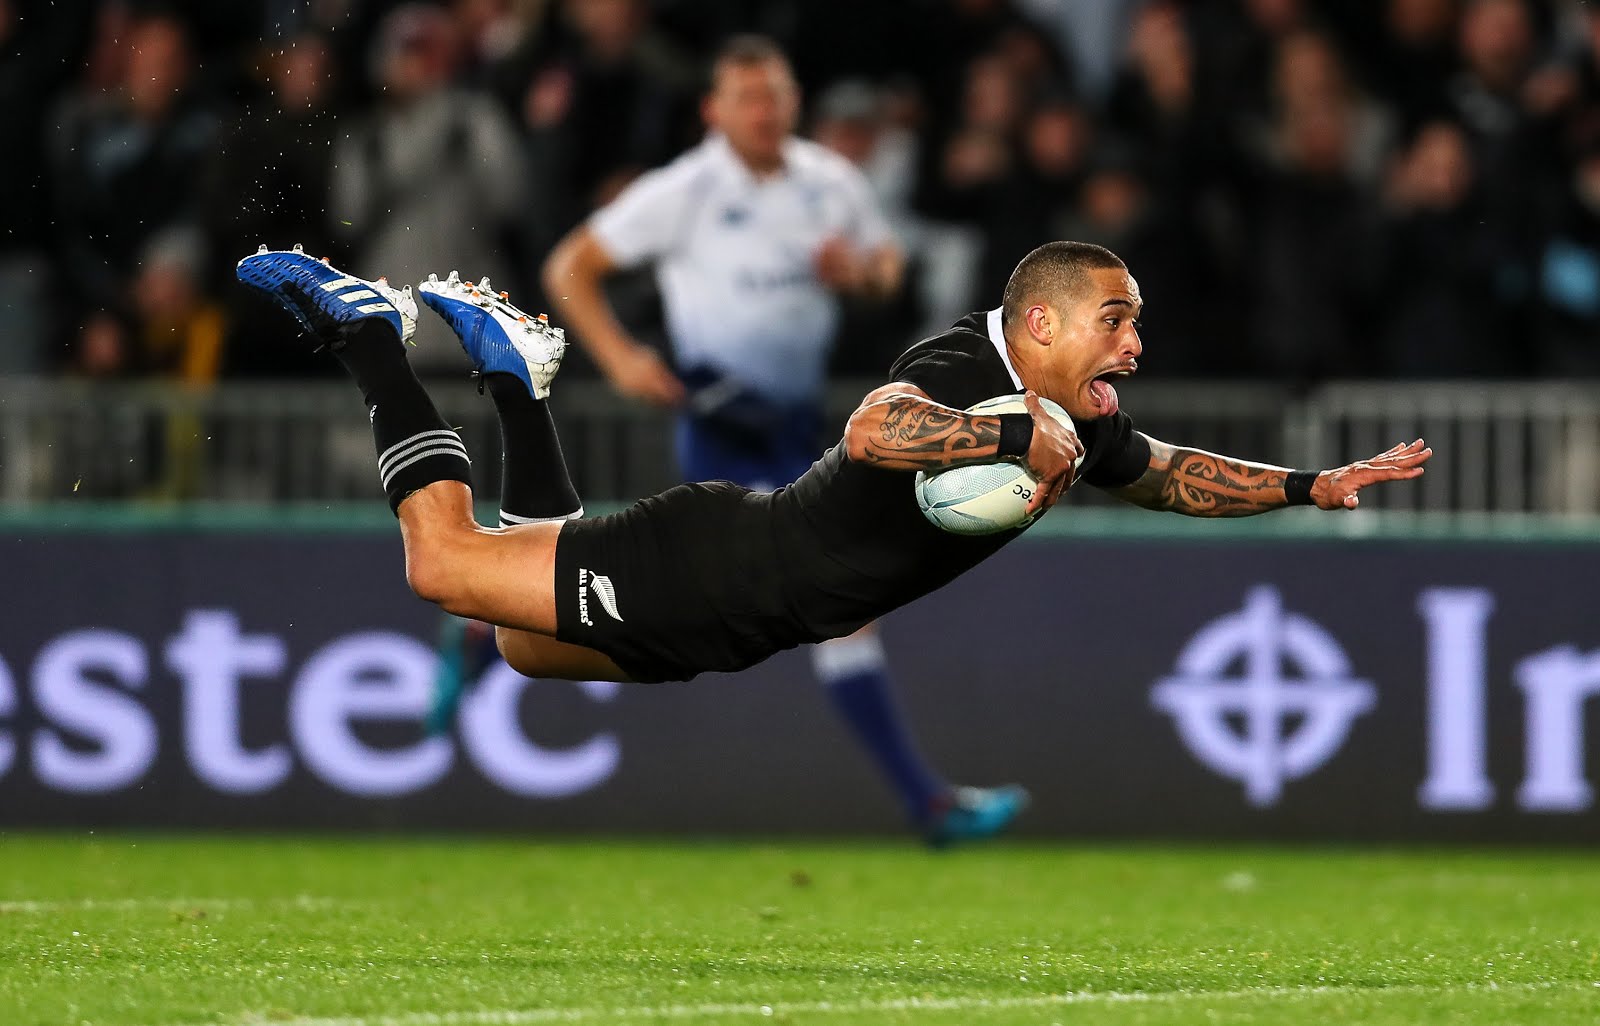 Aaron Smith scores during the Bledisloe Cup Rugby match between the New Zealand All Blacks and Australia Wallabies at Eden Park in Auckland, New Zealand on Saturday, 17 August 2019. 